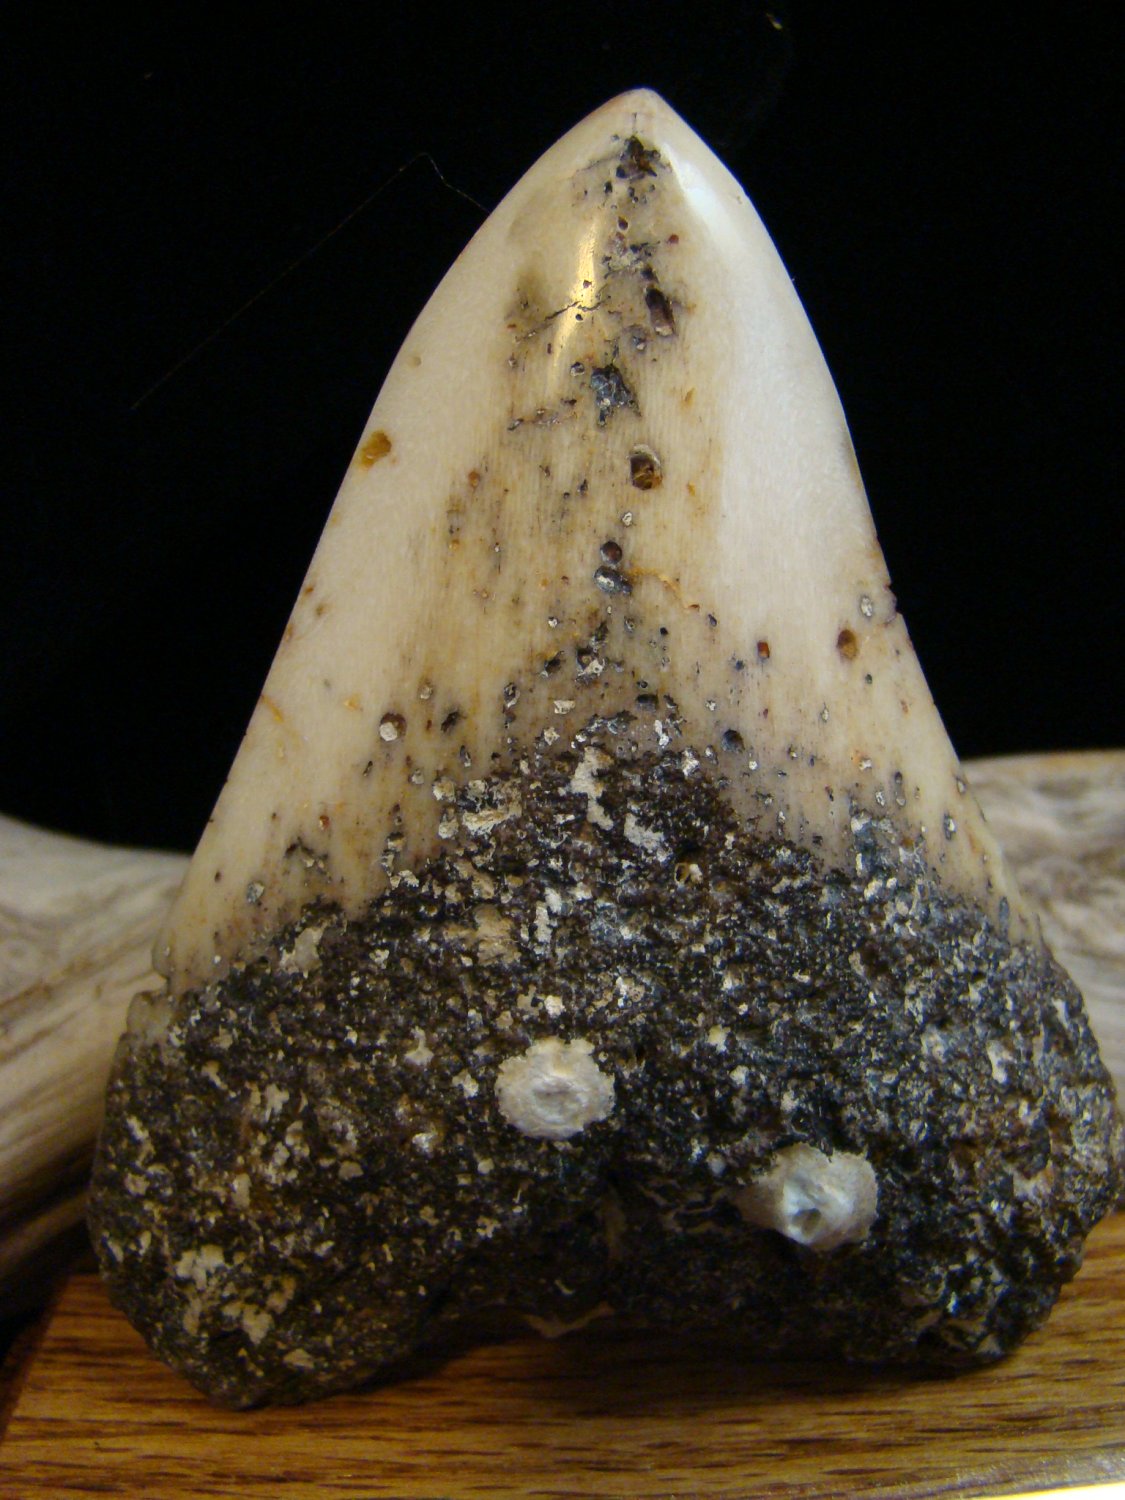 Rare 4 1/2" Pacific Ocean Fossil Megalodon Shark Tooth - New Caledonia